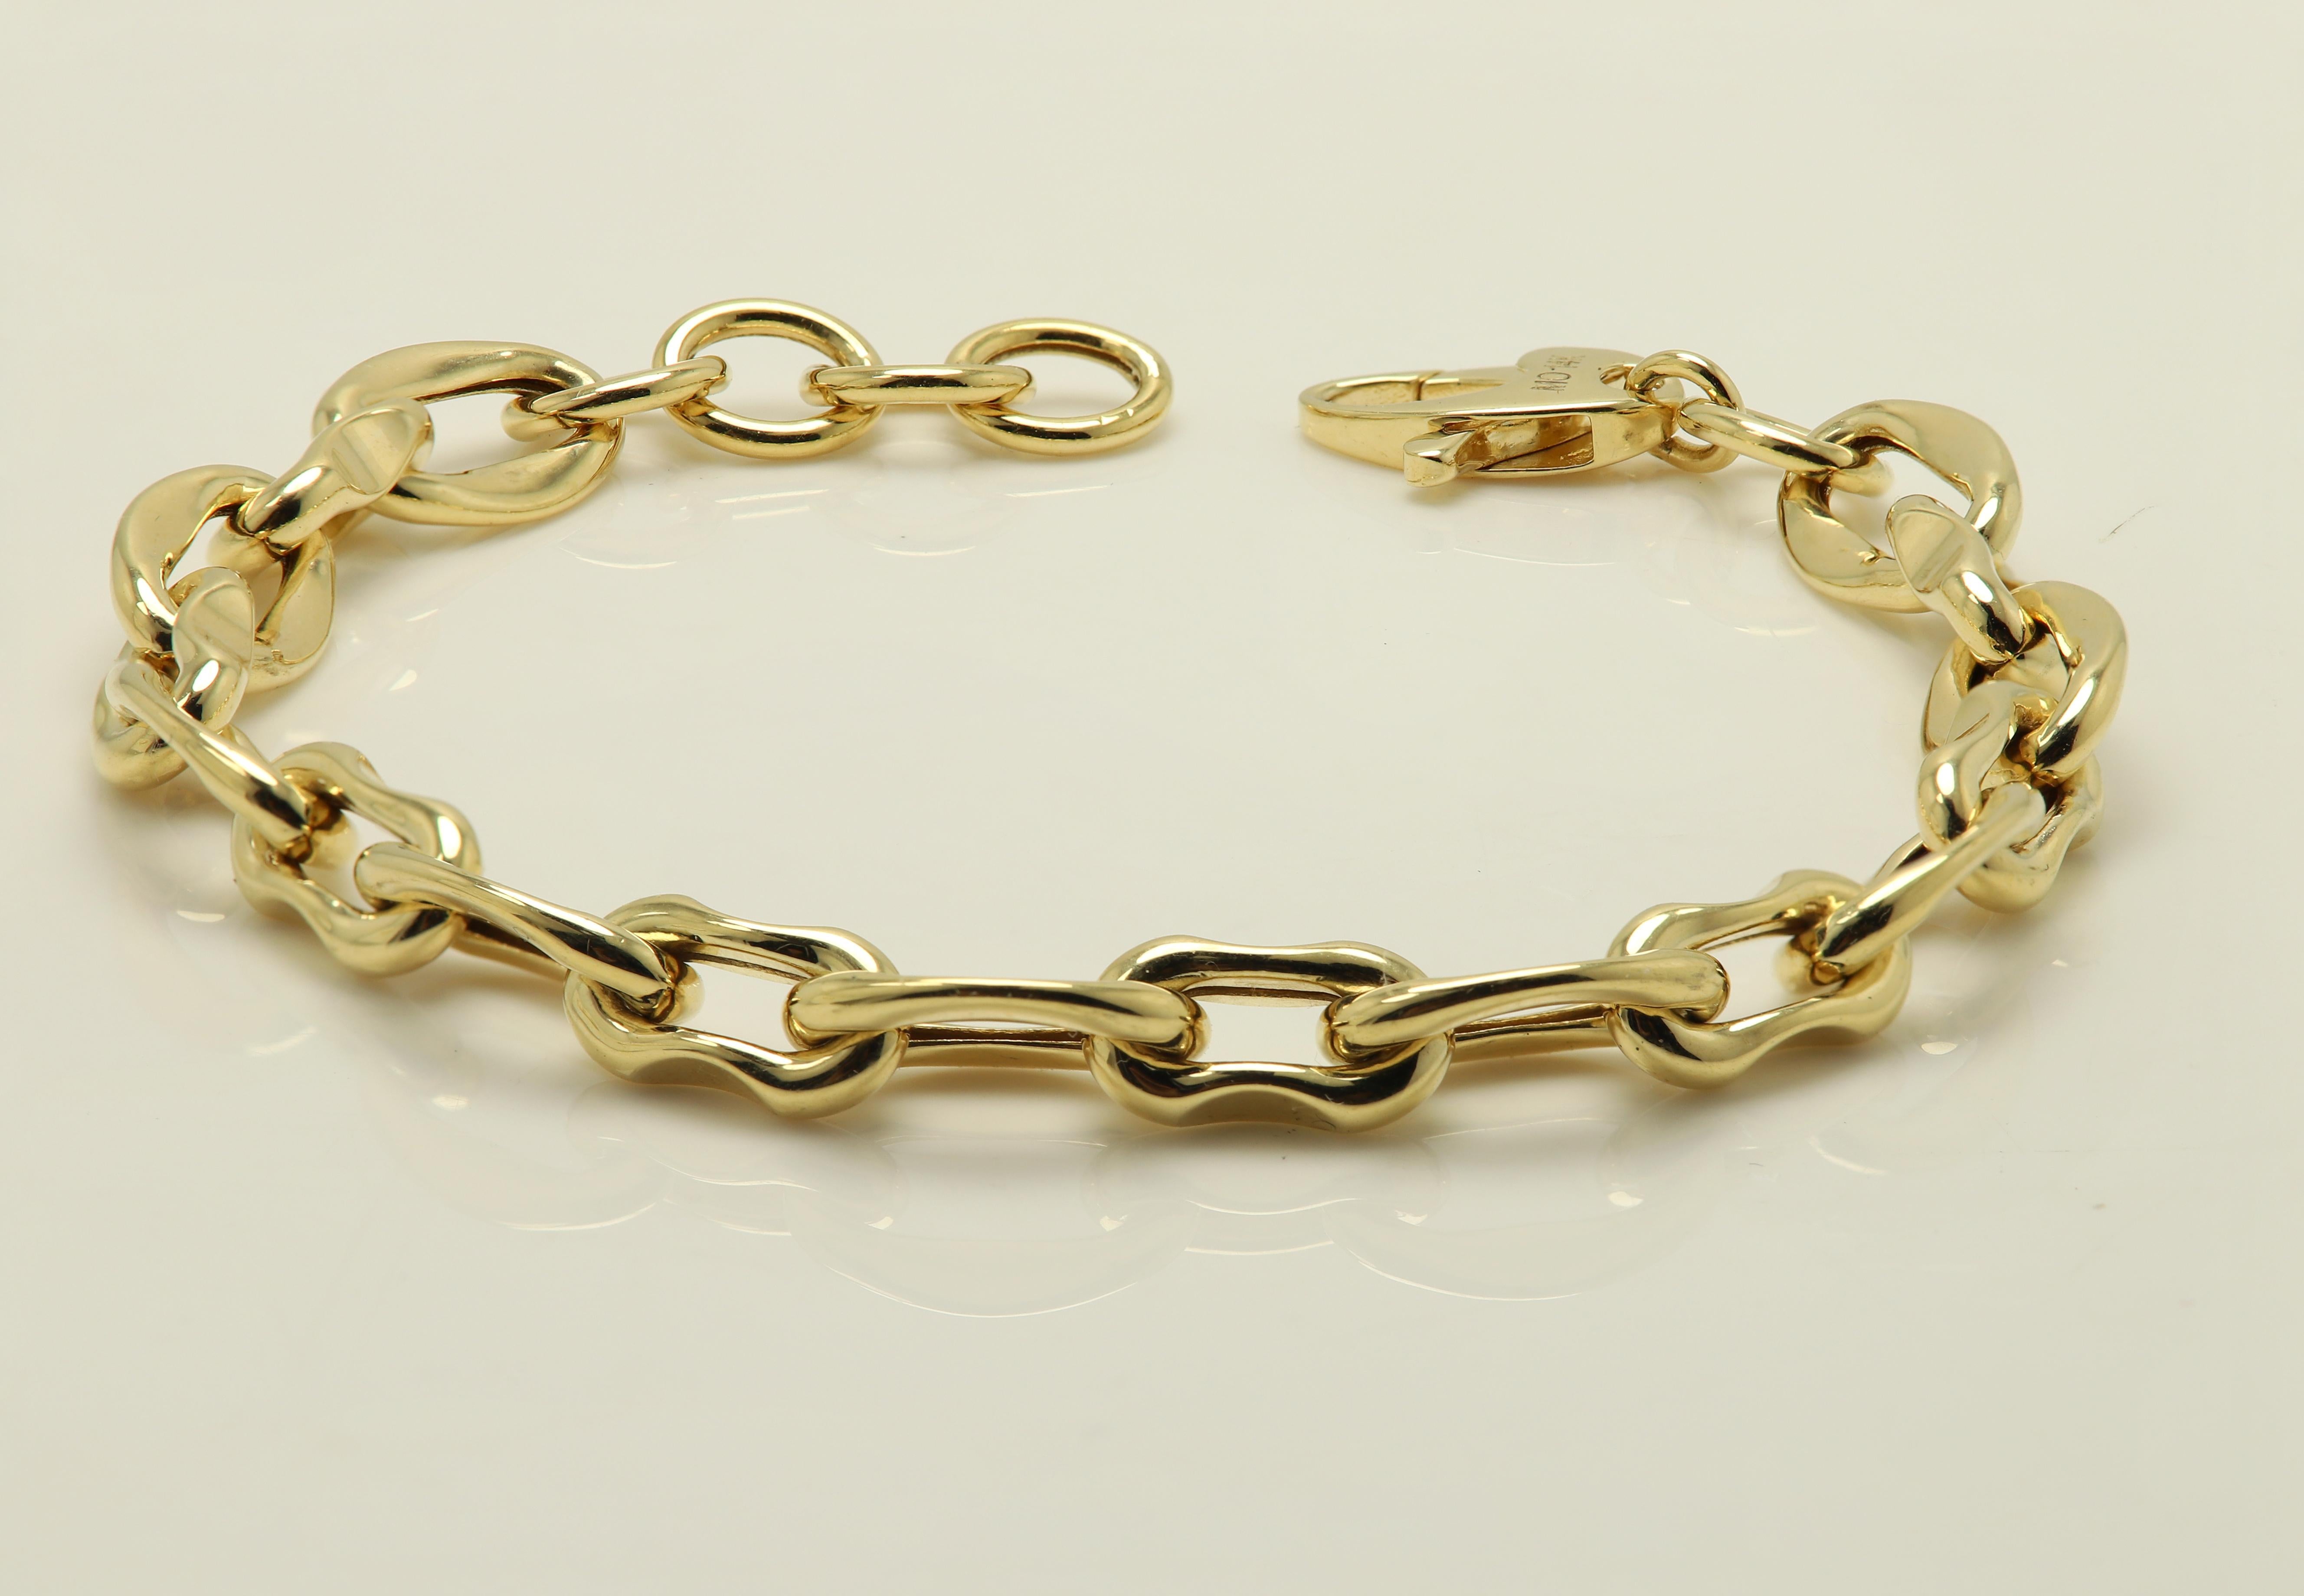 Beautiful Link Bracelet -  well made and very trendy look.
very elegant, Has a good balance between elegancy and trendy, not too bulky but not too thin either.
14k yellow gold 8.5 grams.
Length; 7.5' Inch
made In Italy.
approx individual link size